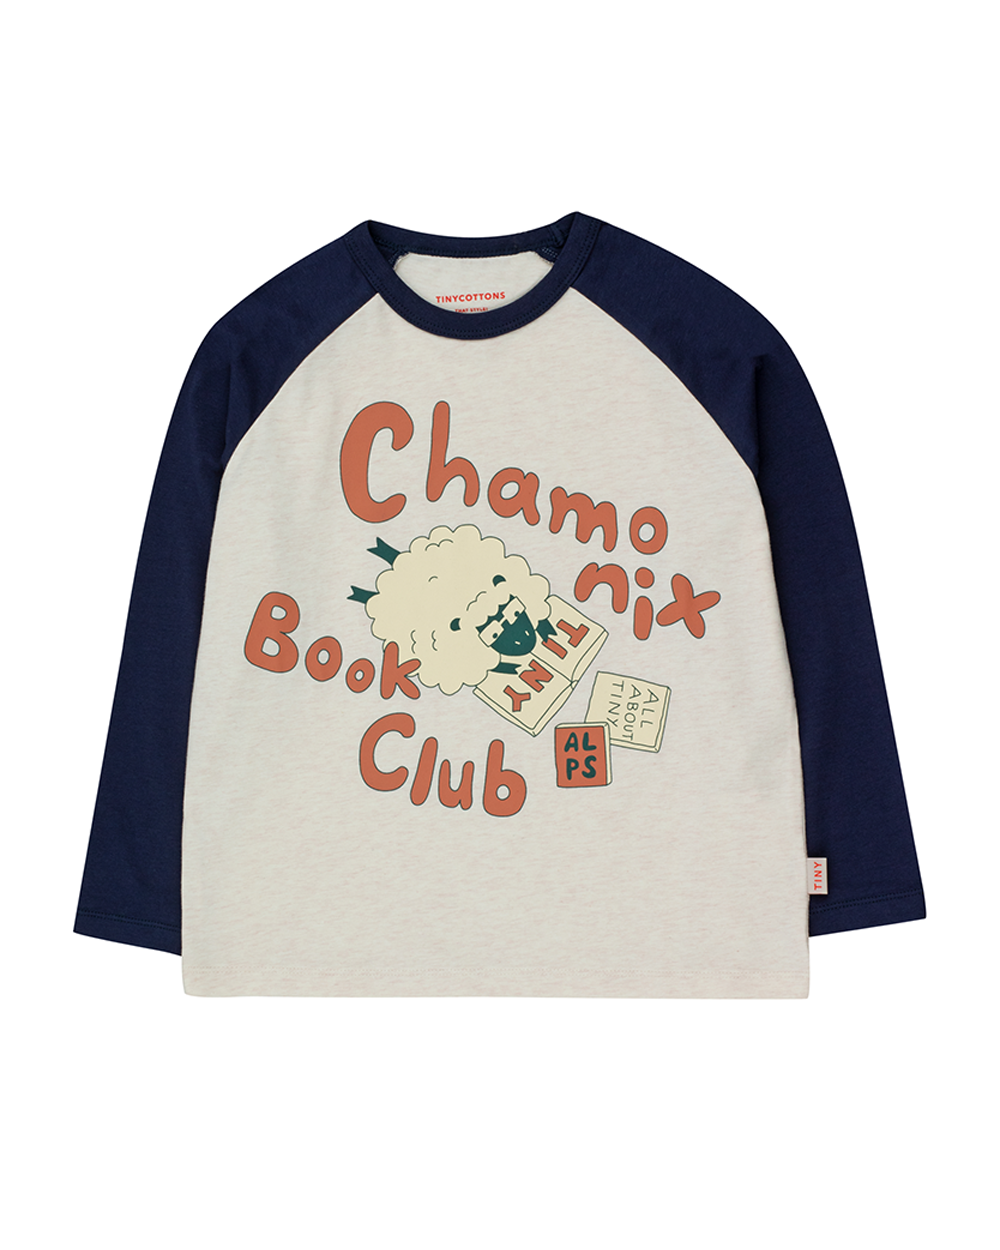 [TINY COTTONS] BOOK CLUB TEE [4Y]